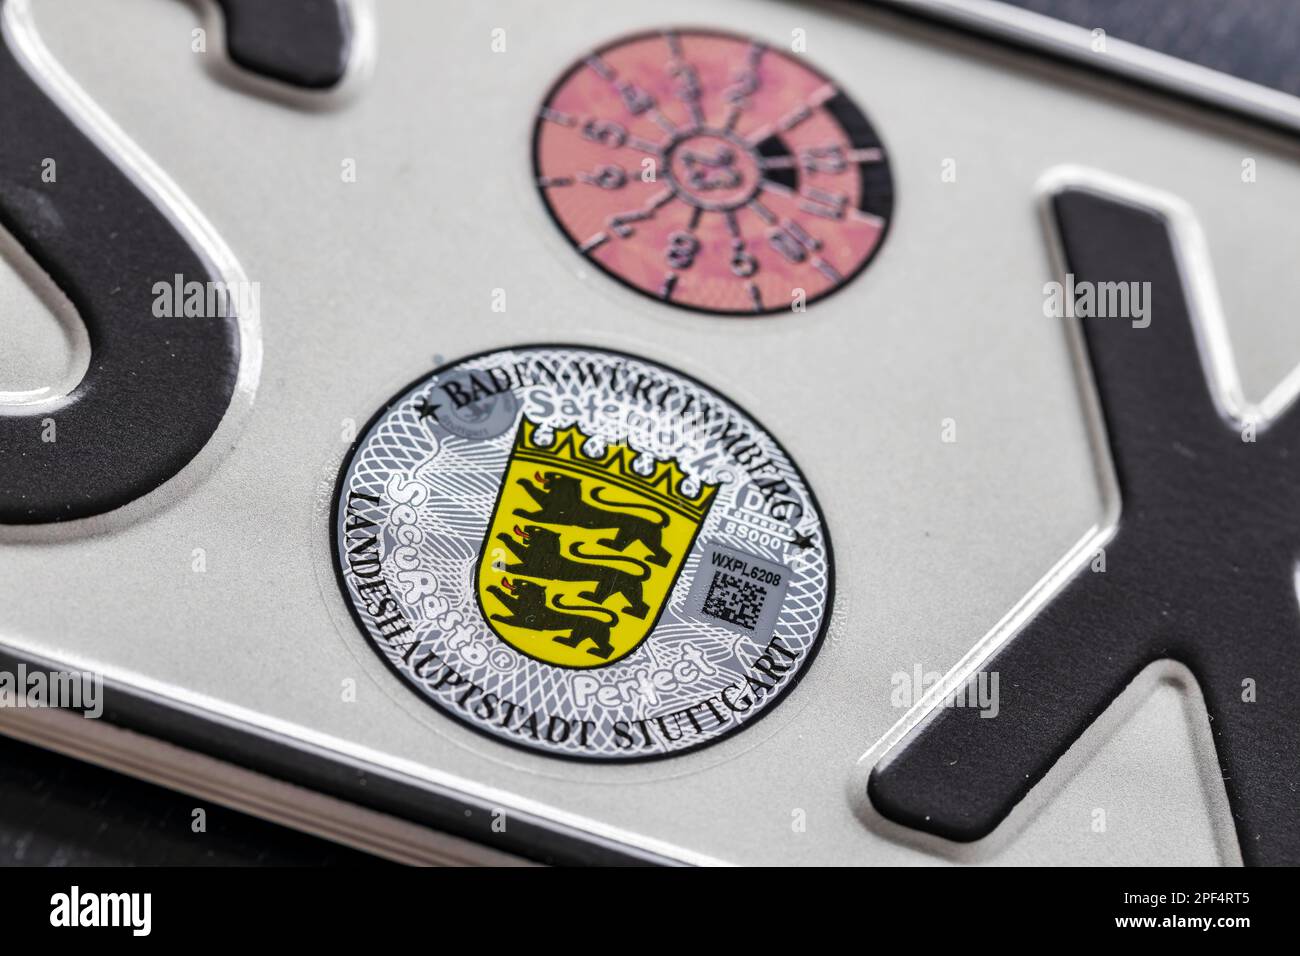 Official seal of the federal state of Baden-Wuerttemberg on a motor vehicle registration plate, TUeV badge and state coat of arms, Stuttgart Stock Photo